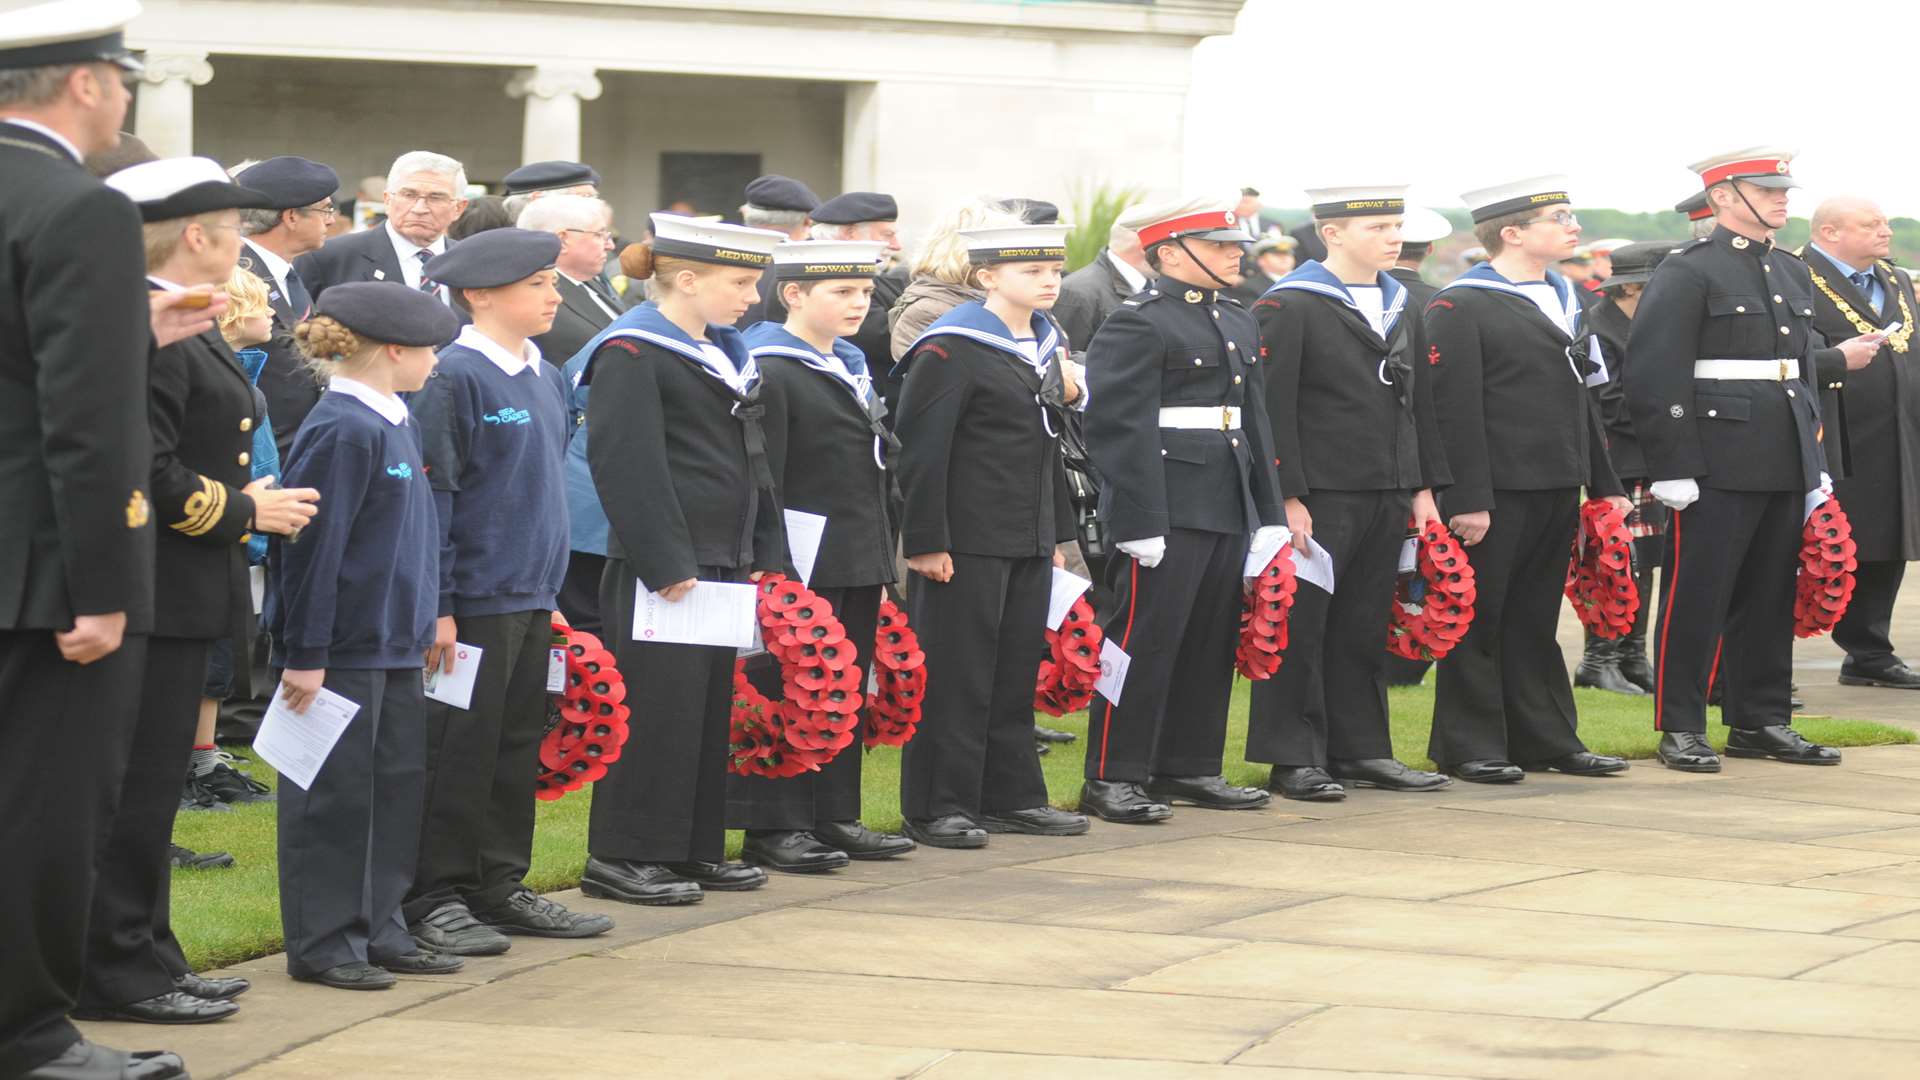 The Royal Marines Cadets and the Sea Cadets at the Battle of Jutland 100th anniversary service at the Chatham Naval Memorial